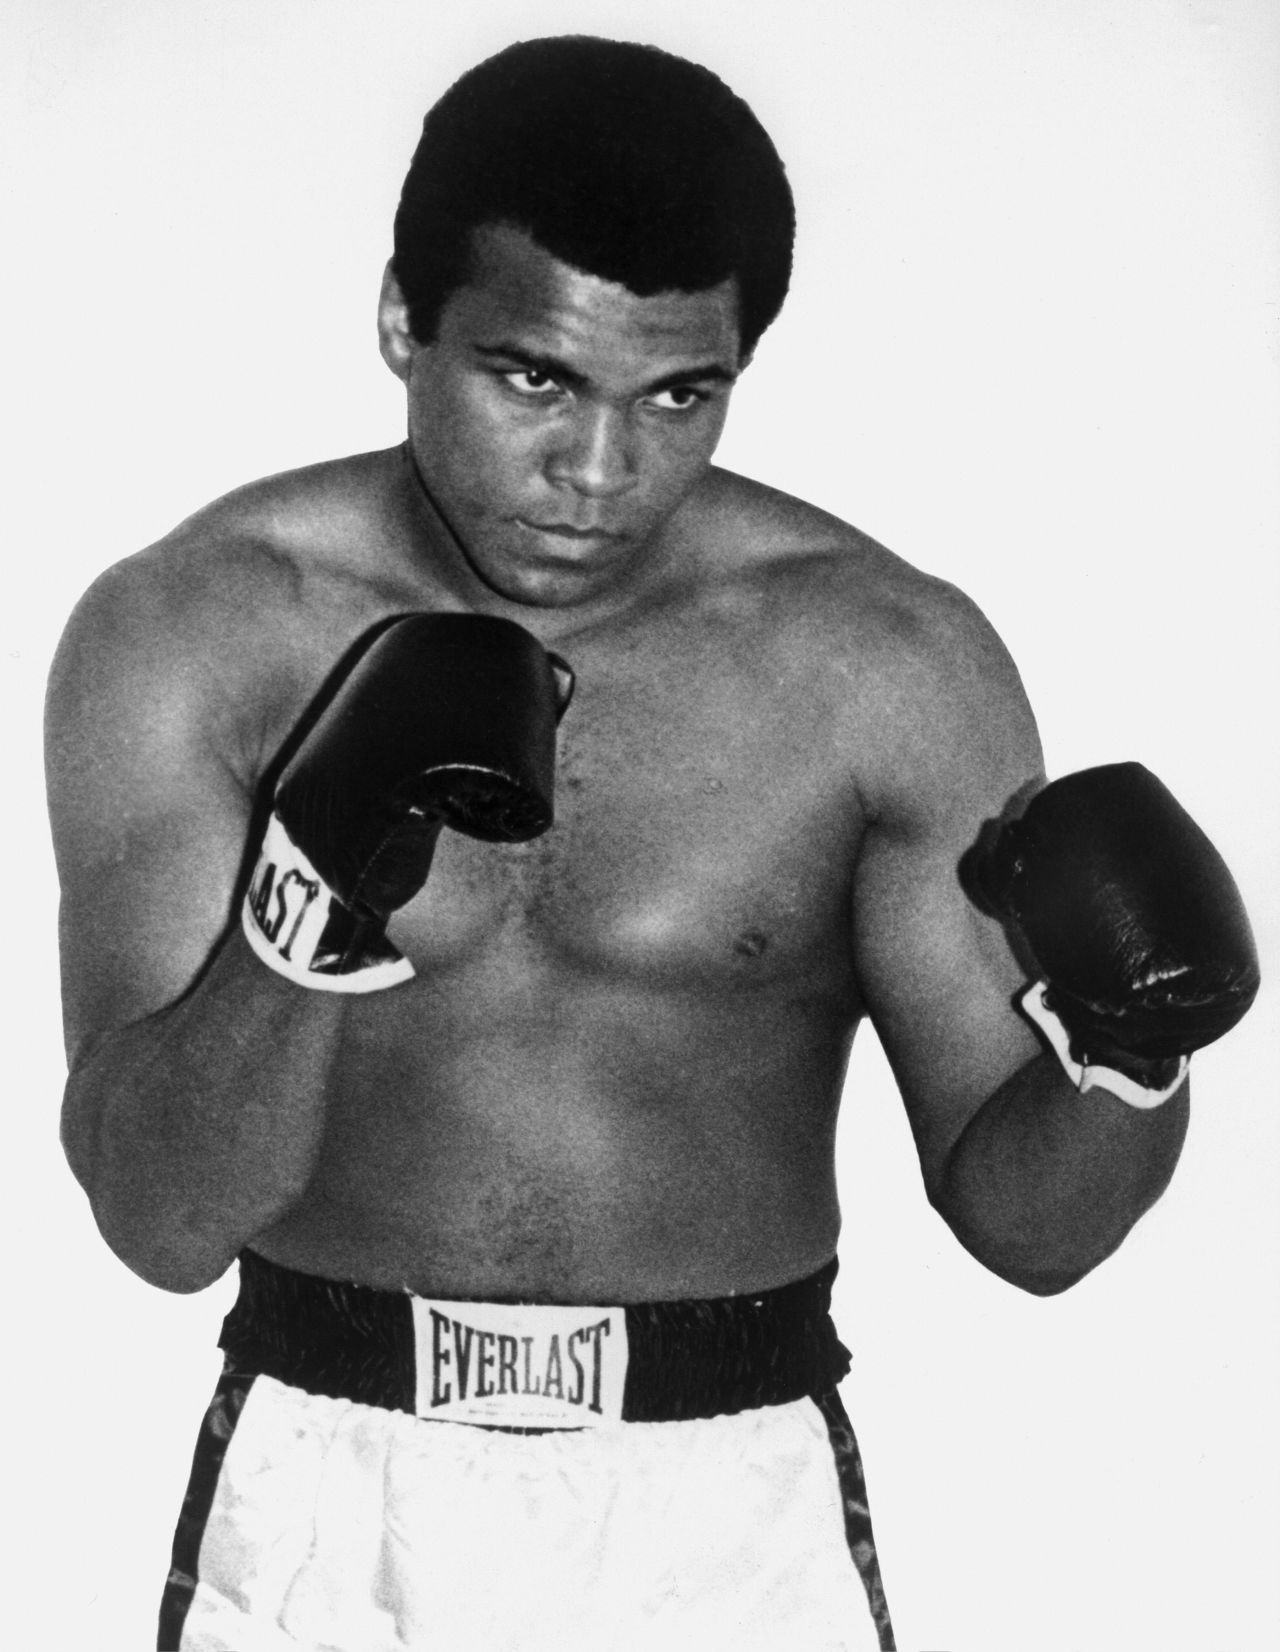 <a href="http://www.cnn.com/2016/06/04/world/muhammad-ali-obituary/index.html" target="_blank">Muhammad Ali</a>, the three-time heavyweight boxing champion who called himself "The Greatest," died June 3 at the age of 74. Fans on every continent adored him, and at one point he was the probably the most recognizable man on the planet.